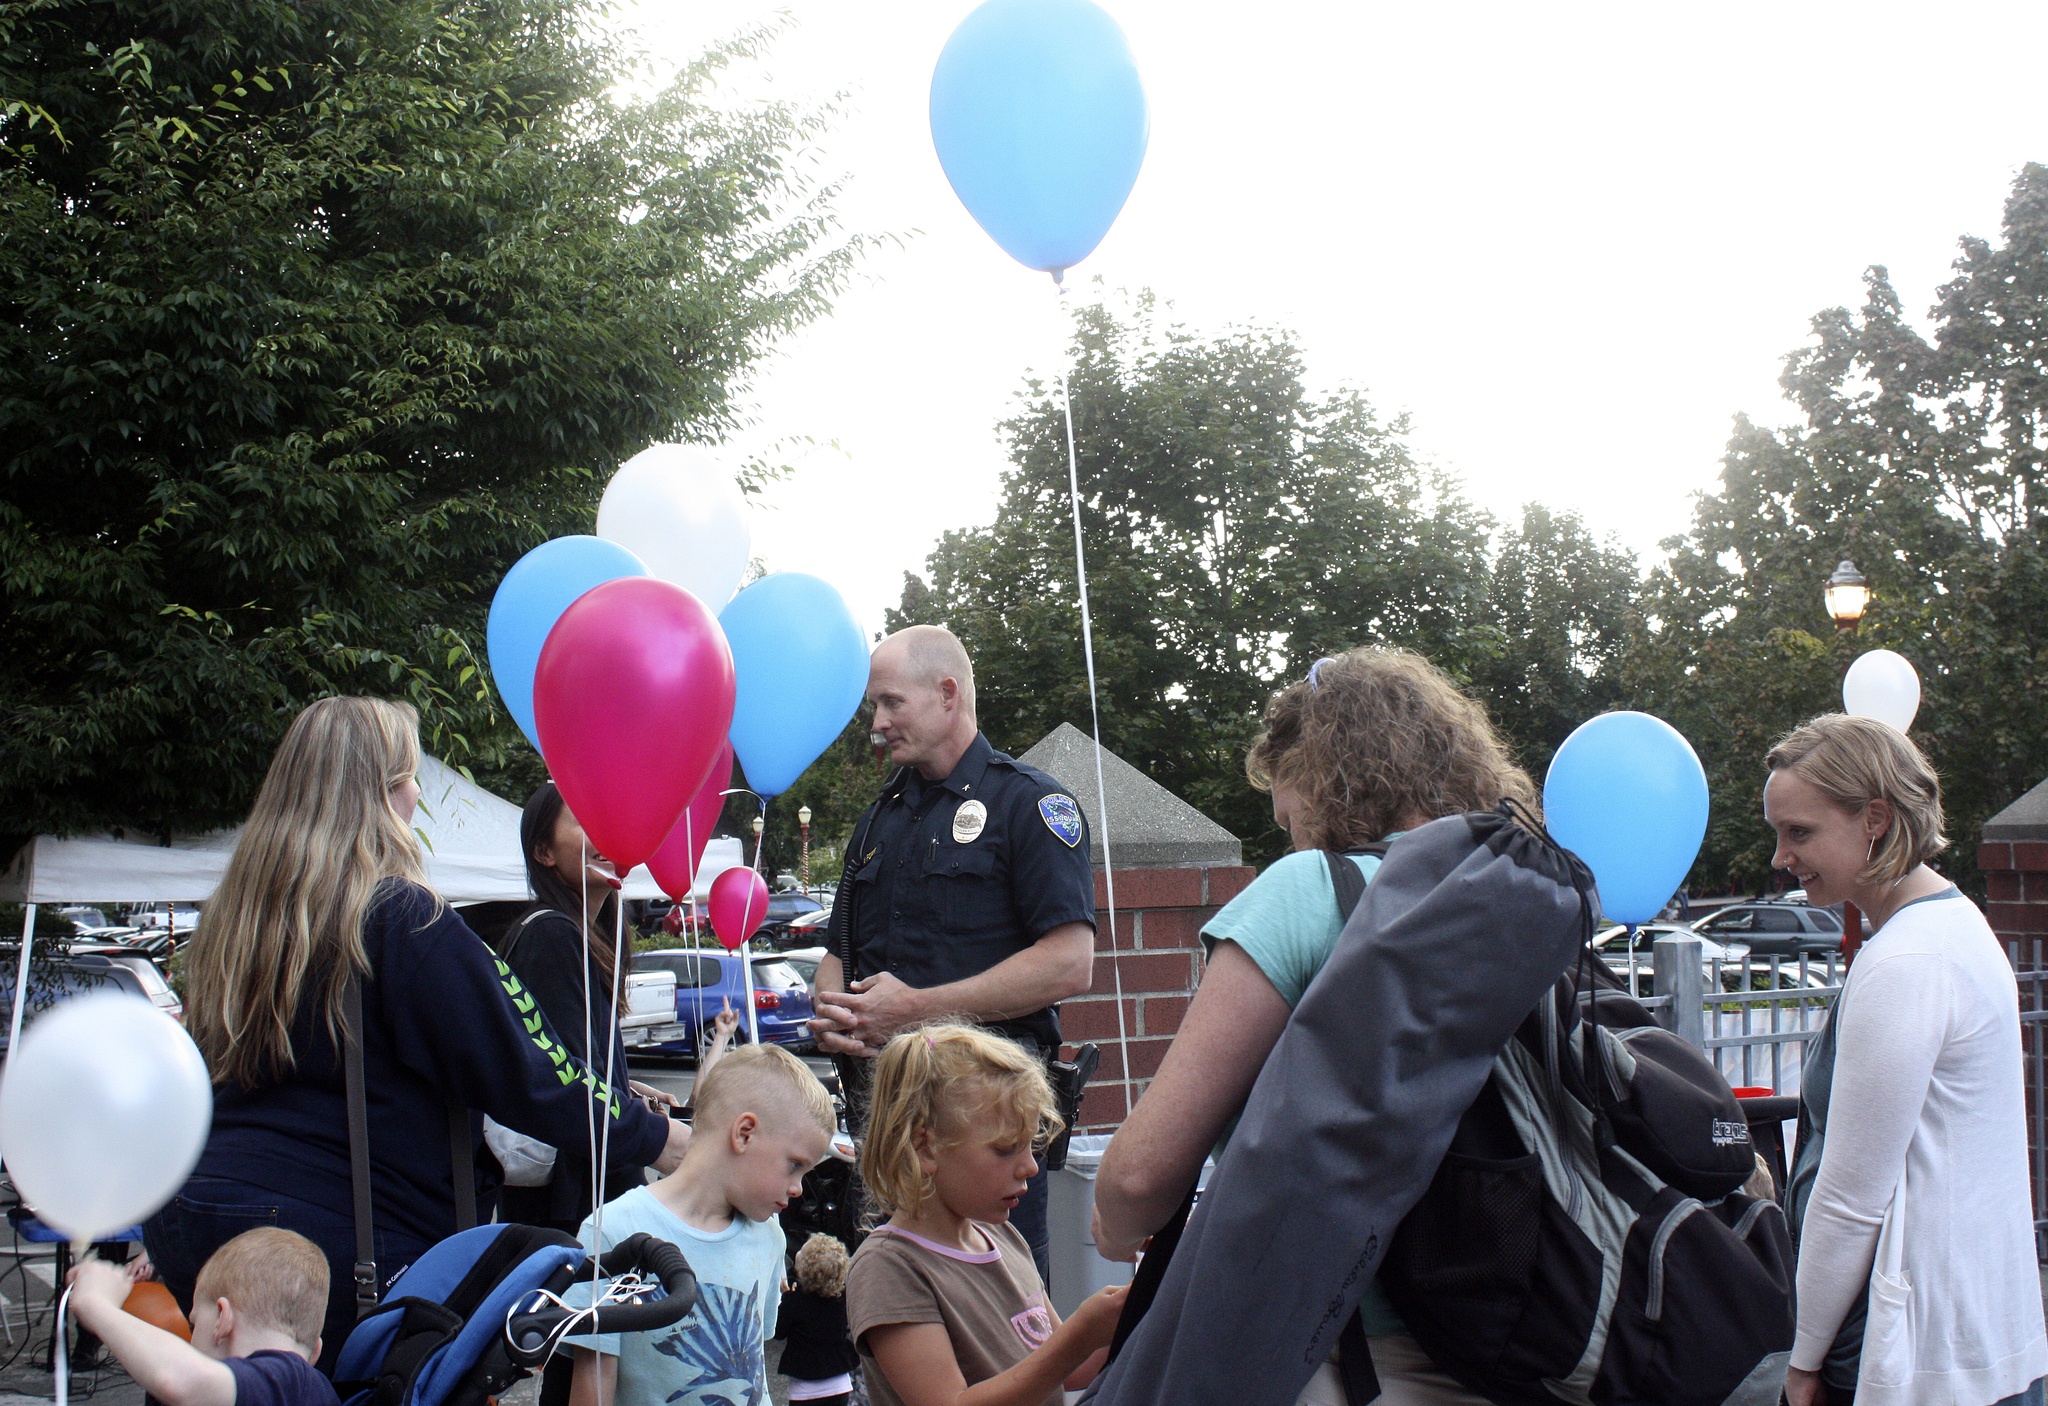 Issaquah police officers gather with residents on National Night Out on Aug. 2 at Issaquah City Hall. Nicole Jennings/staff photo